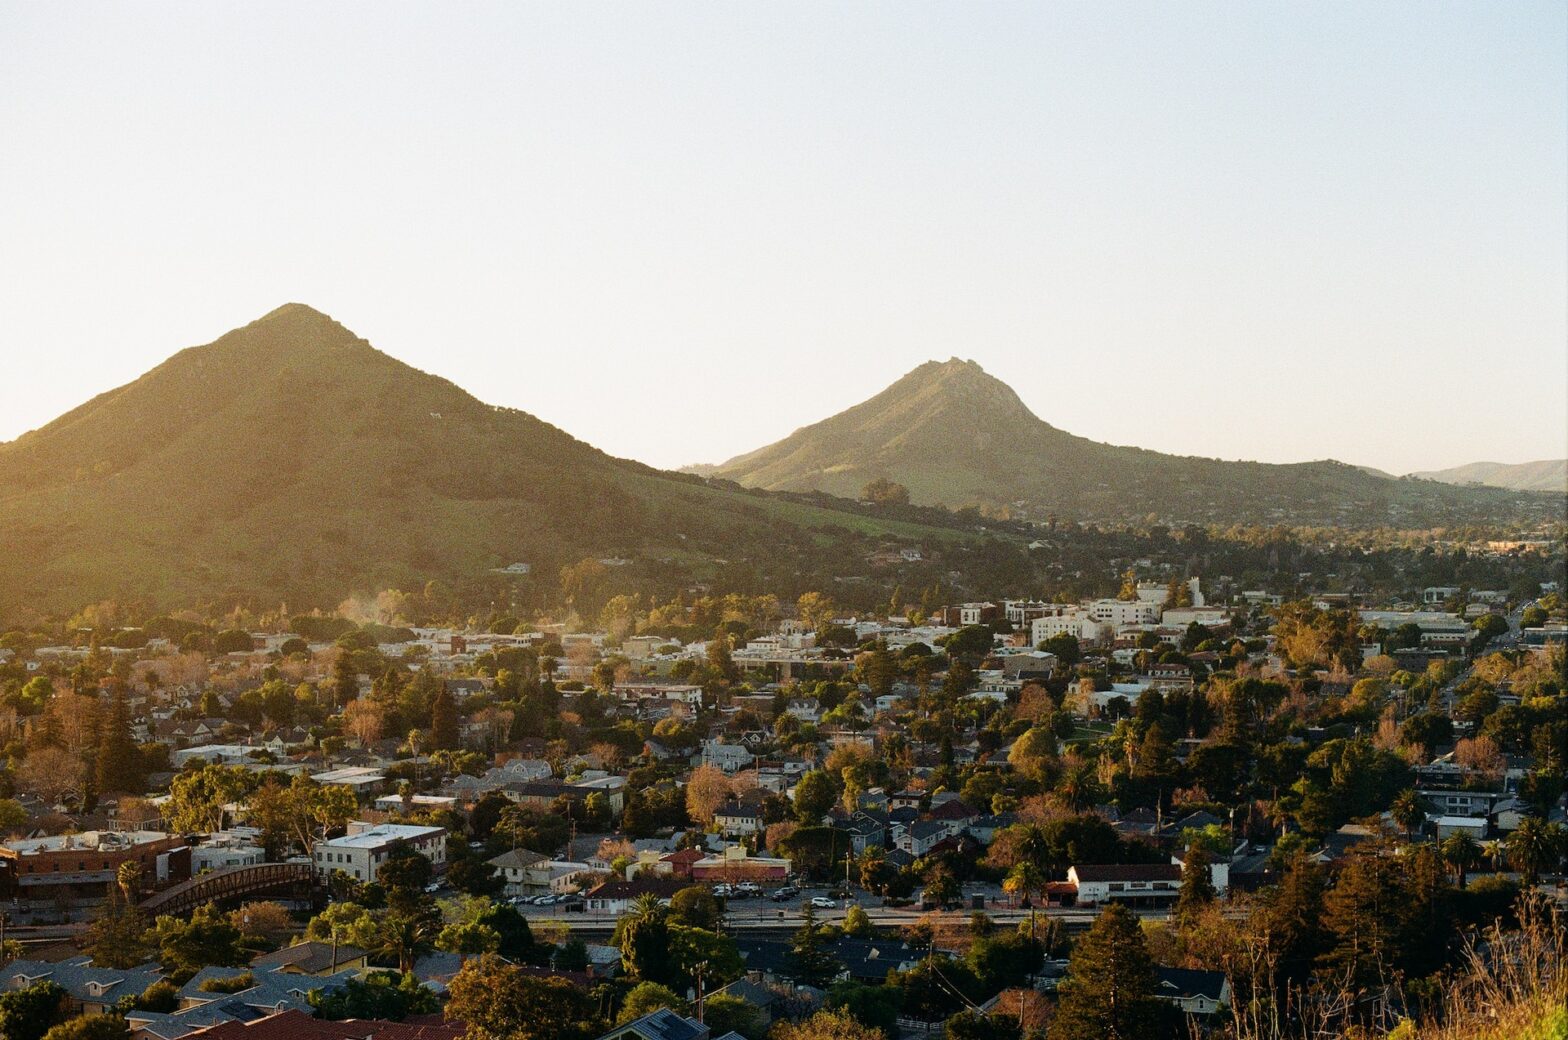 10 Things To Do in San Luis Obispo for a Great Getaway